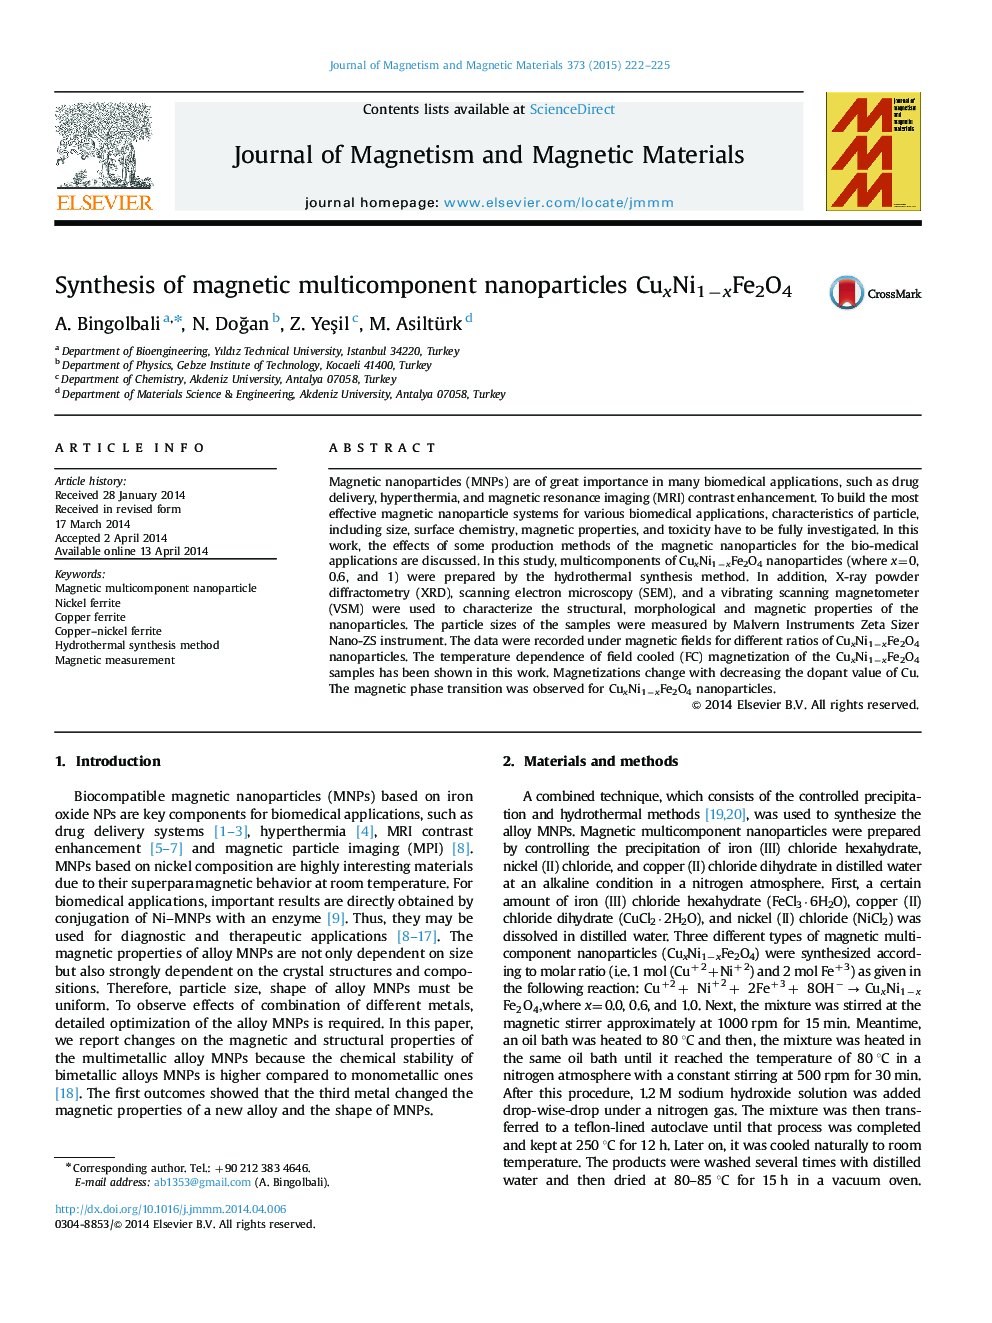 Synthesis of magnetic multicomponent nanoparticles CuxNi1−xFe2O4